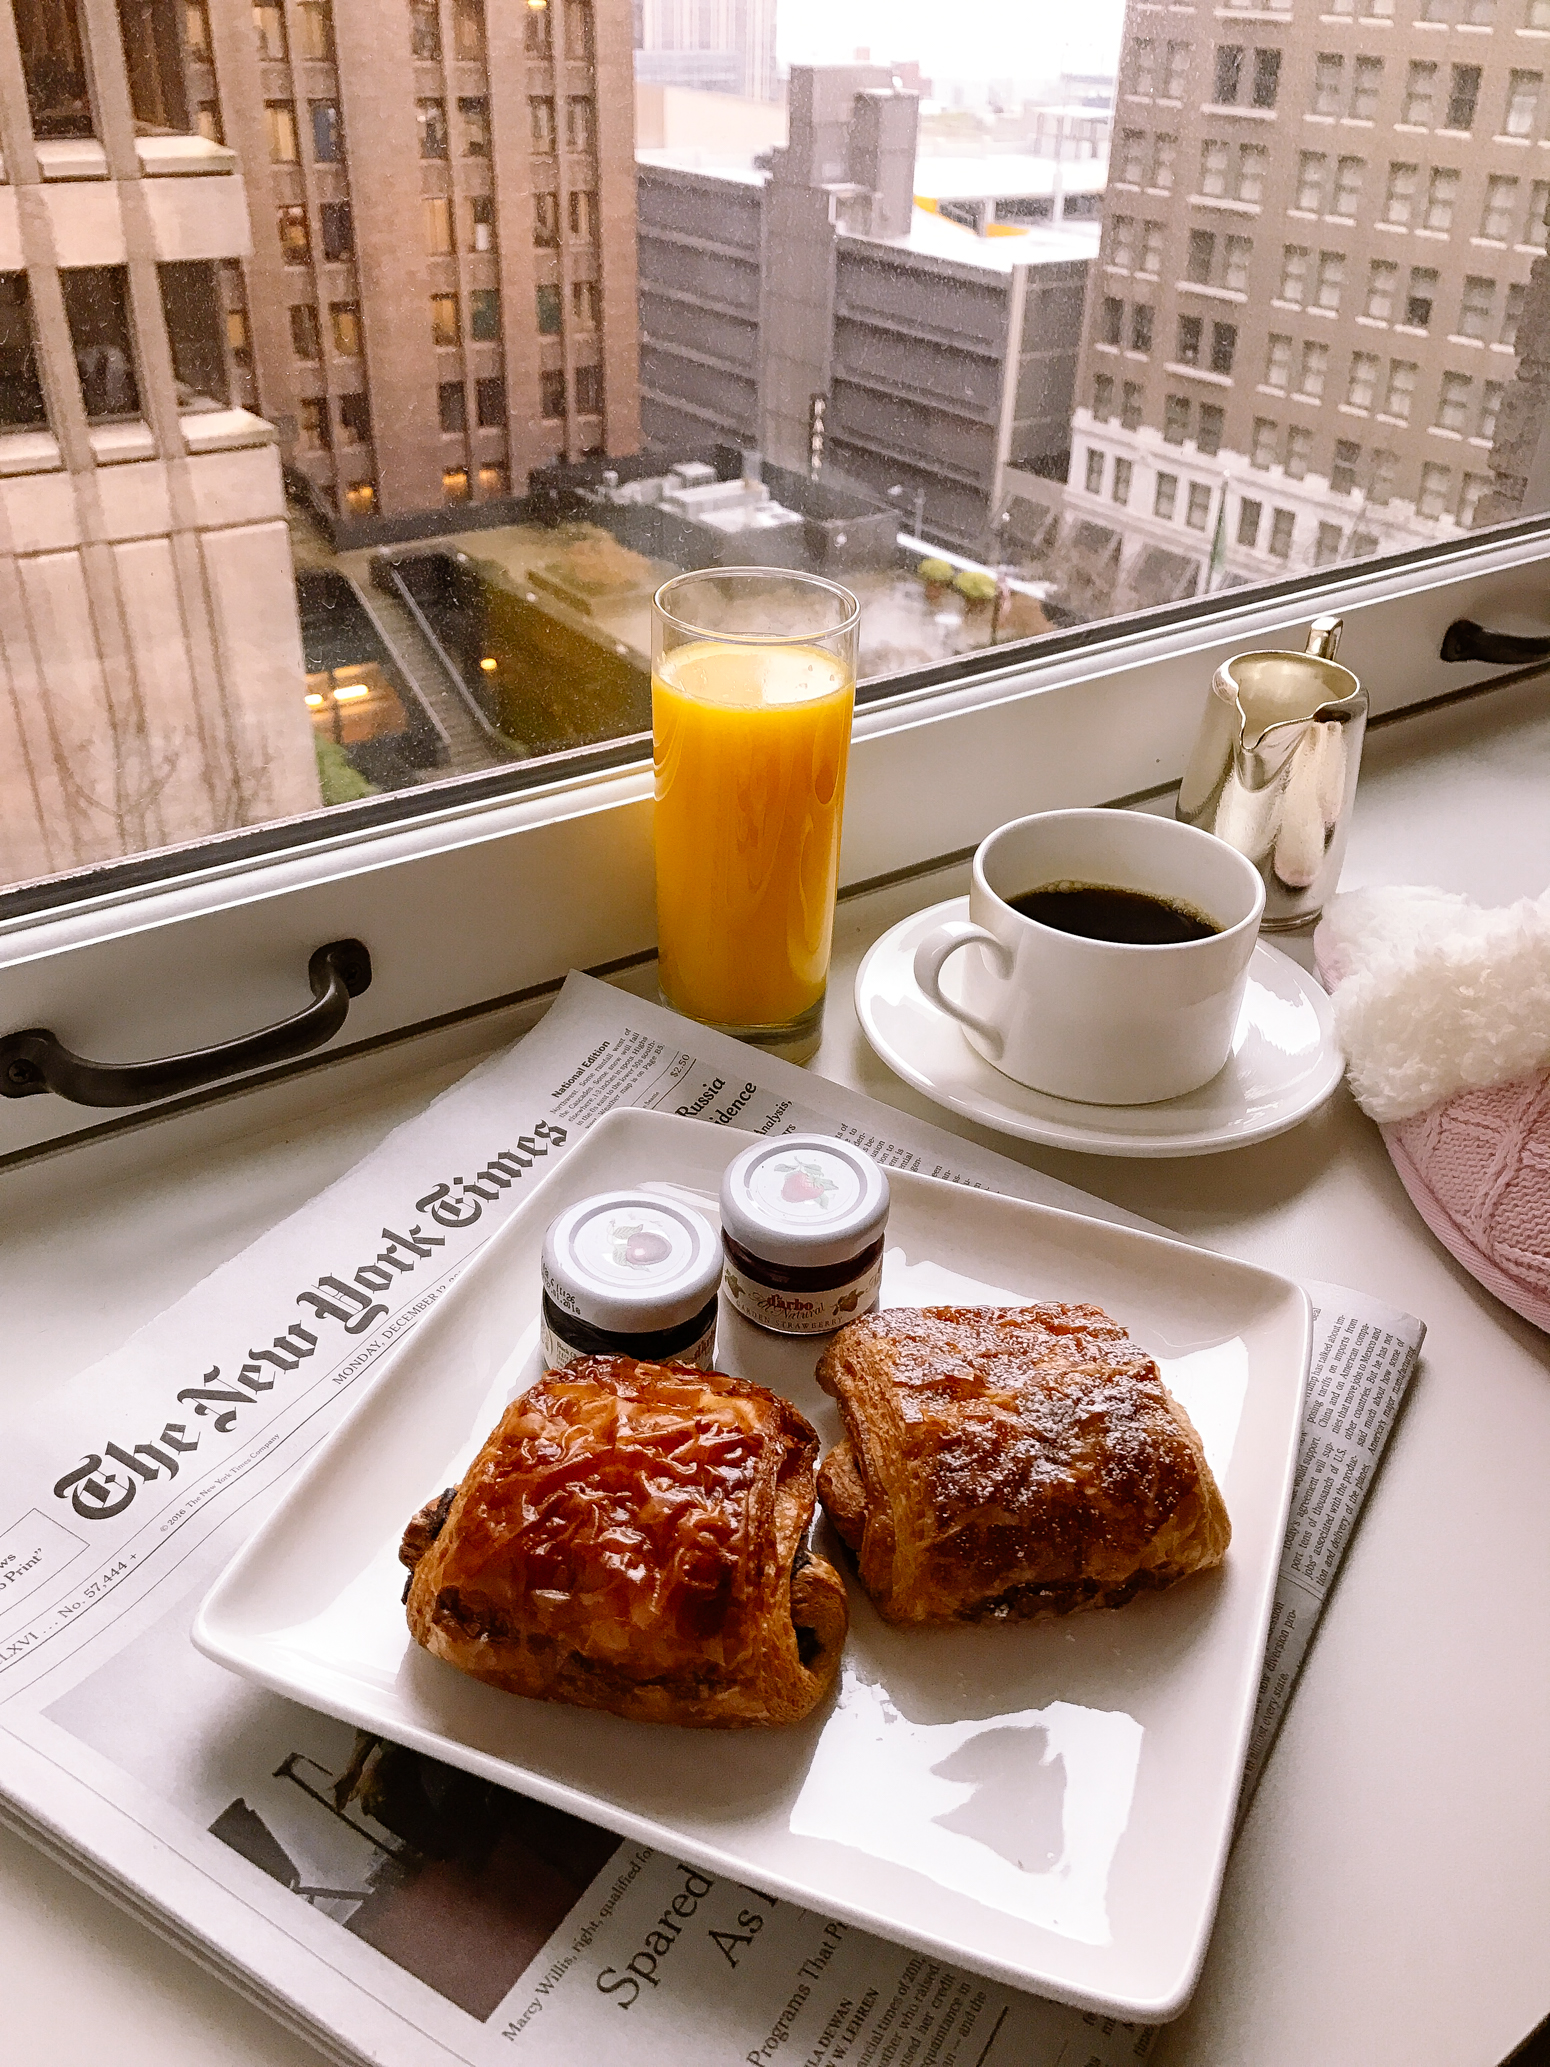 Blondie in the City | Victoria's Secret Pajamas, Room Service | Fairmont Olympic hotel in Seattle